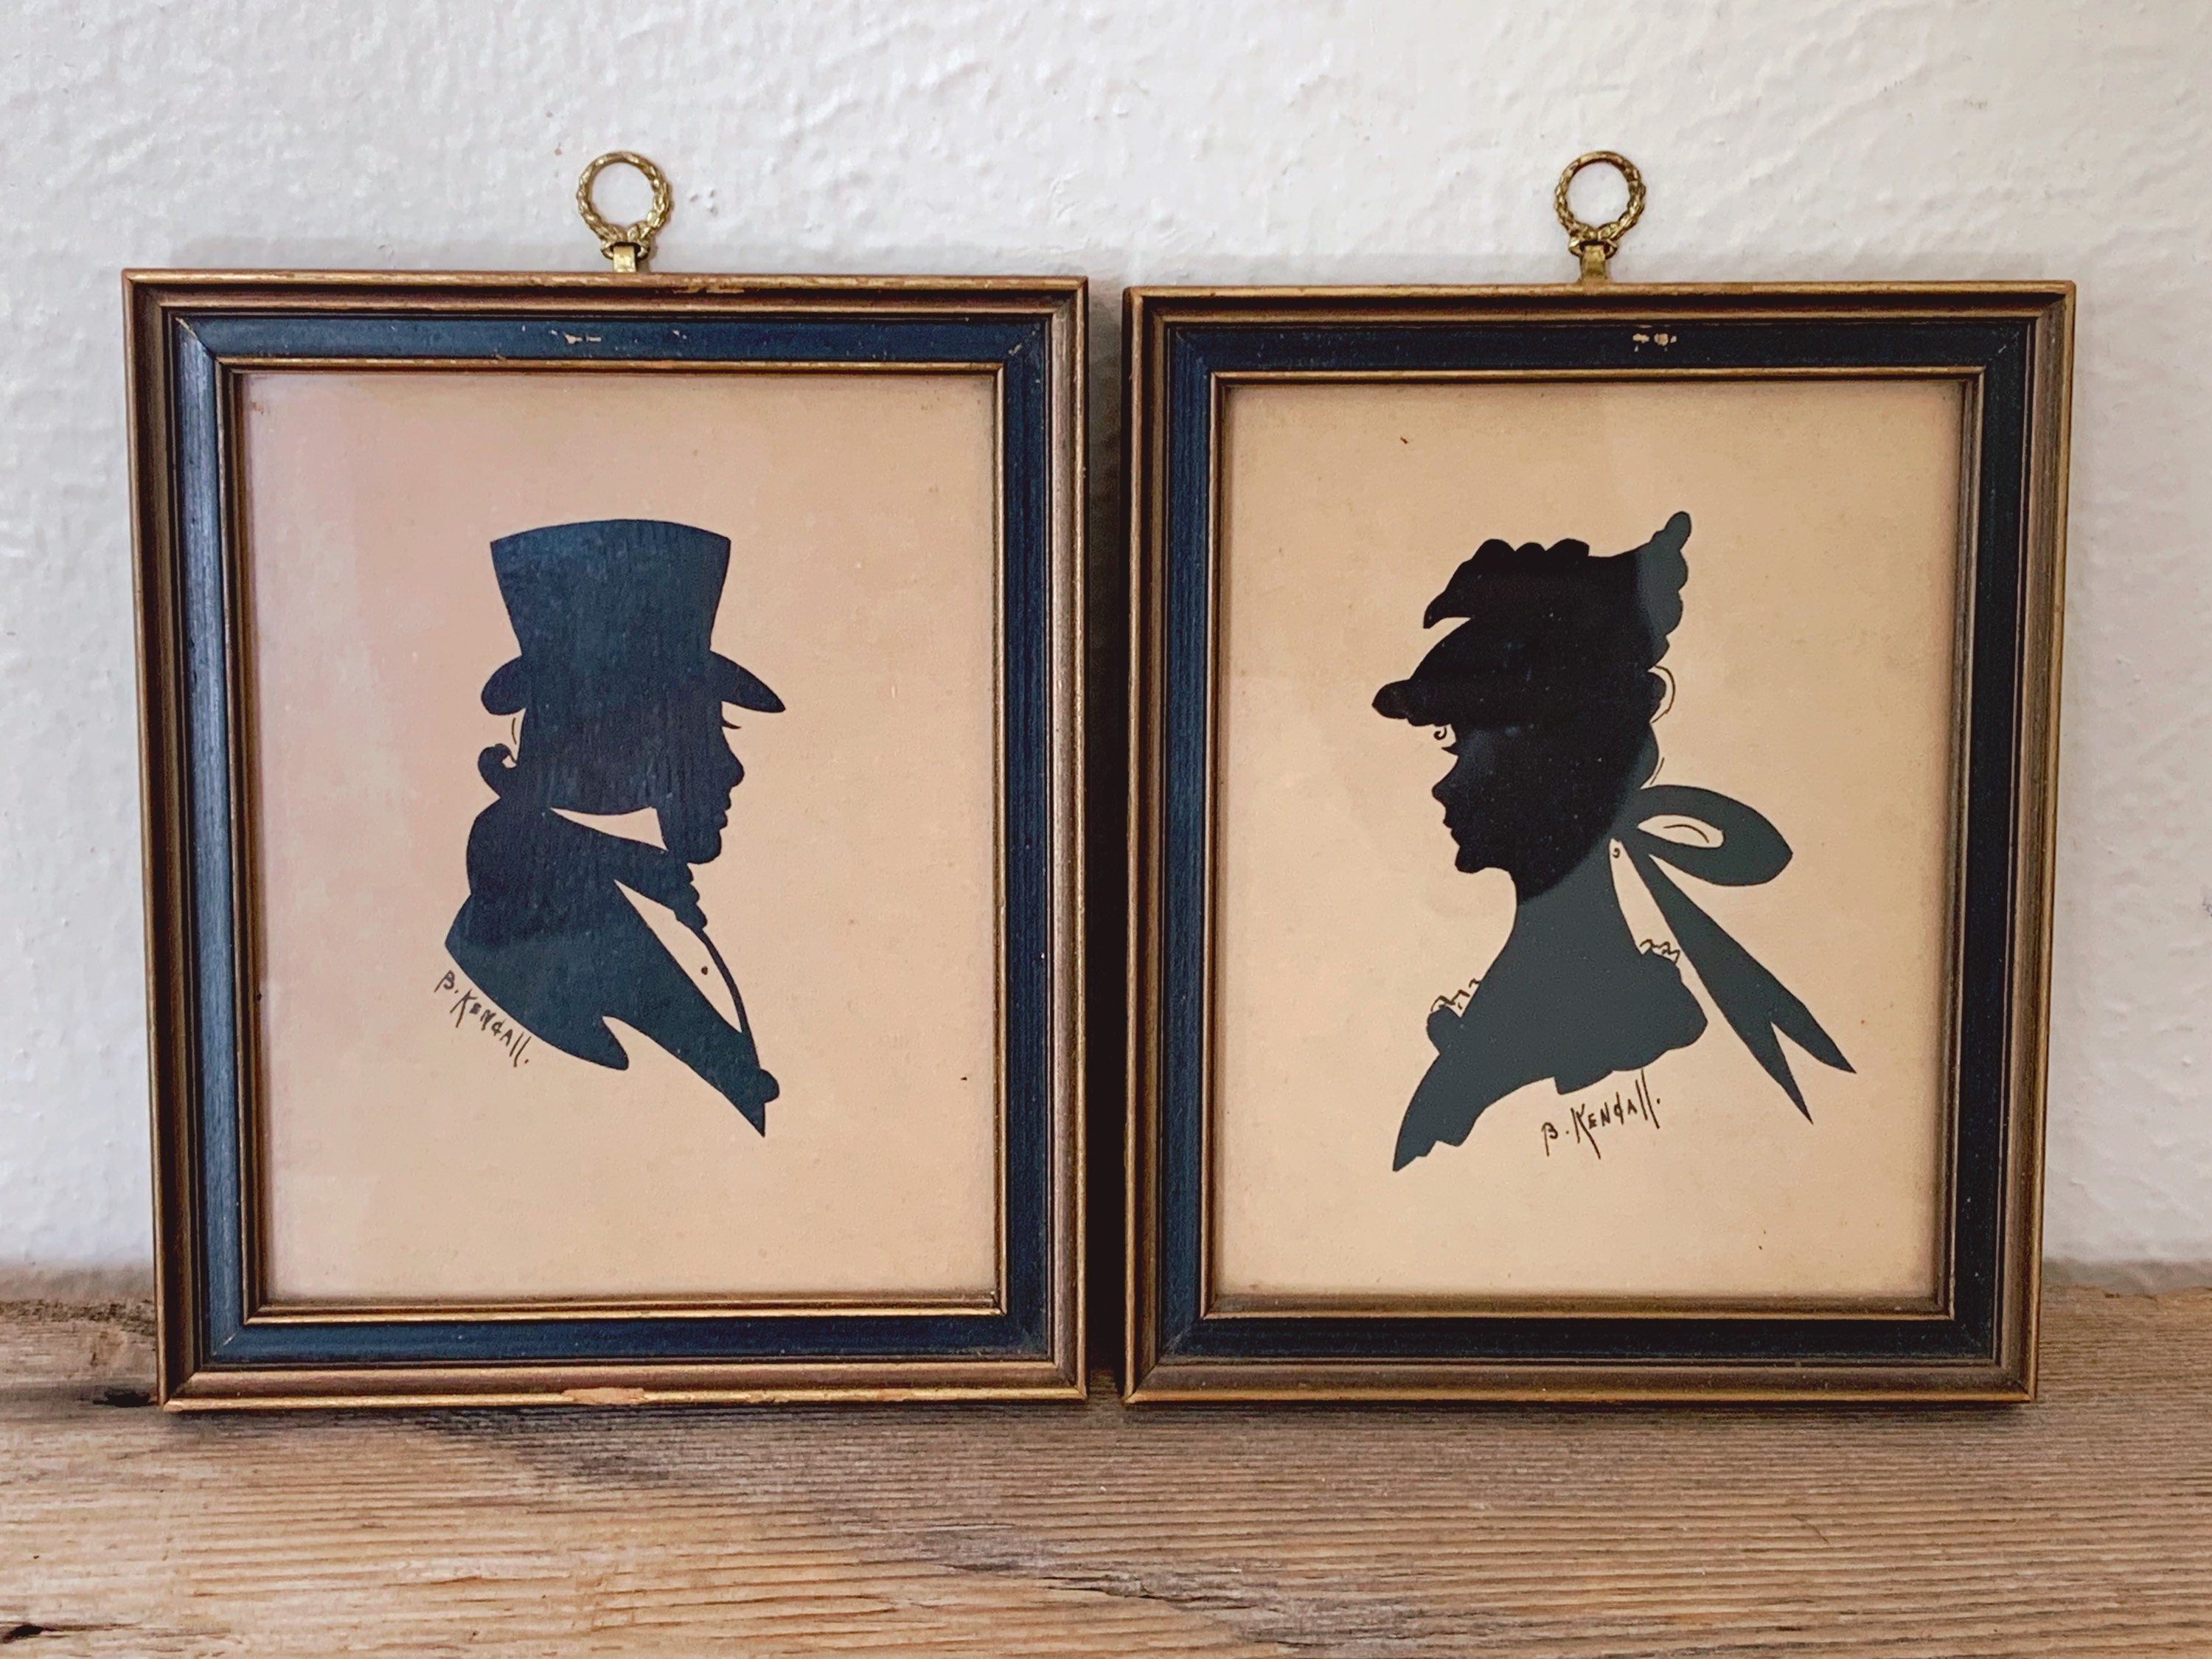 Pair of Antique 1800s Hand Cut Silhouettes of A Lady and Gentleman in Old Wooden Frames | By Beatrice Kendall | Vintage Wall Decor